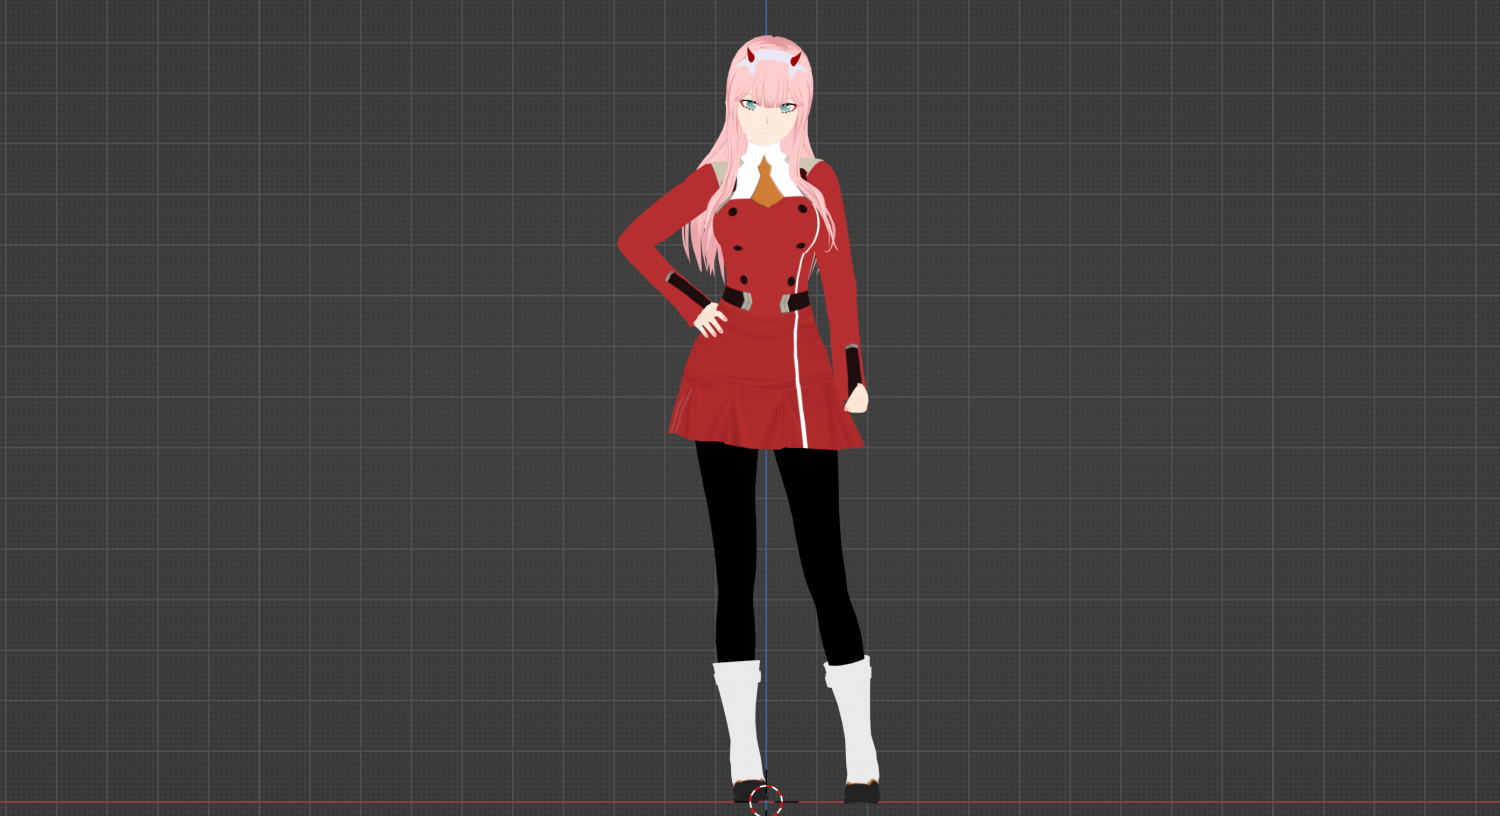 Download Zero Two, cartoon character from the sci-fi anime Darling in the  Franxx